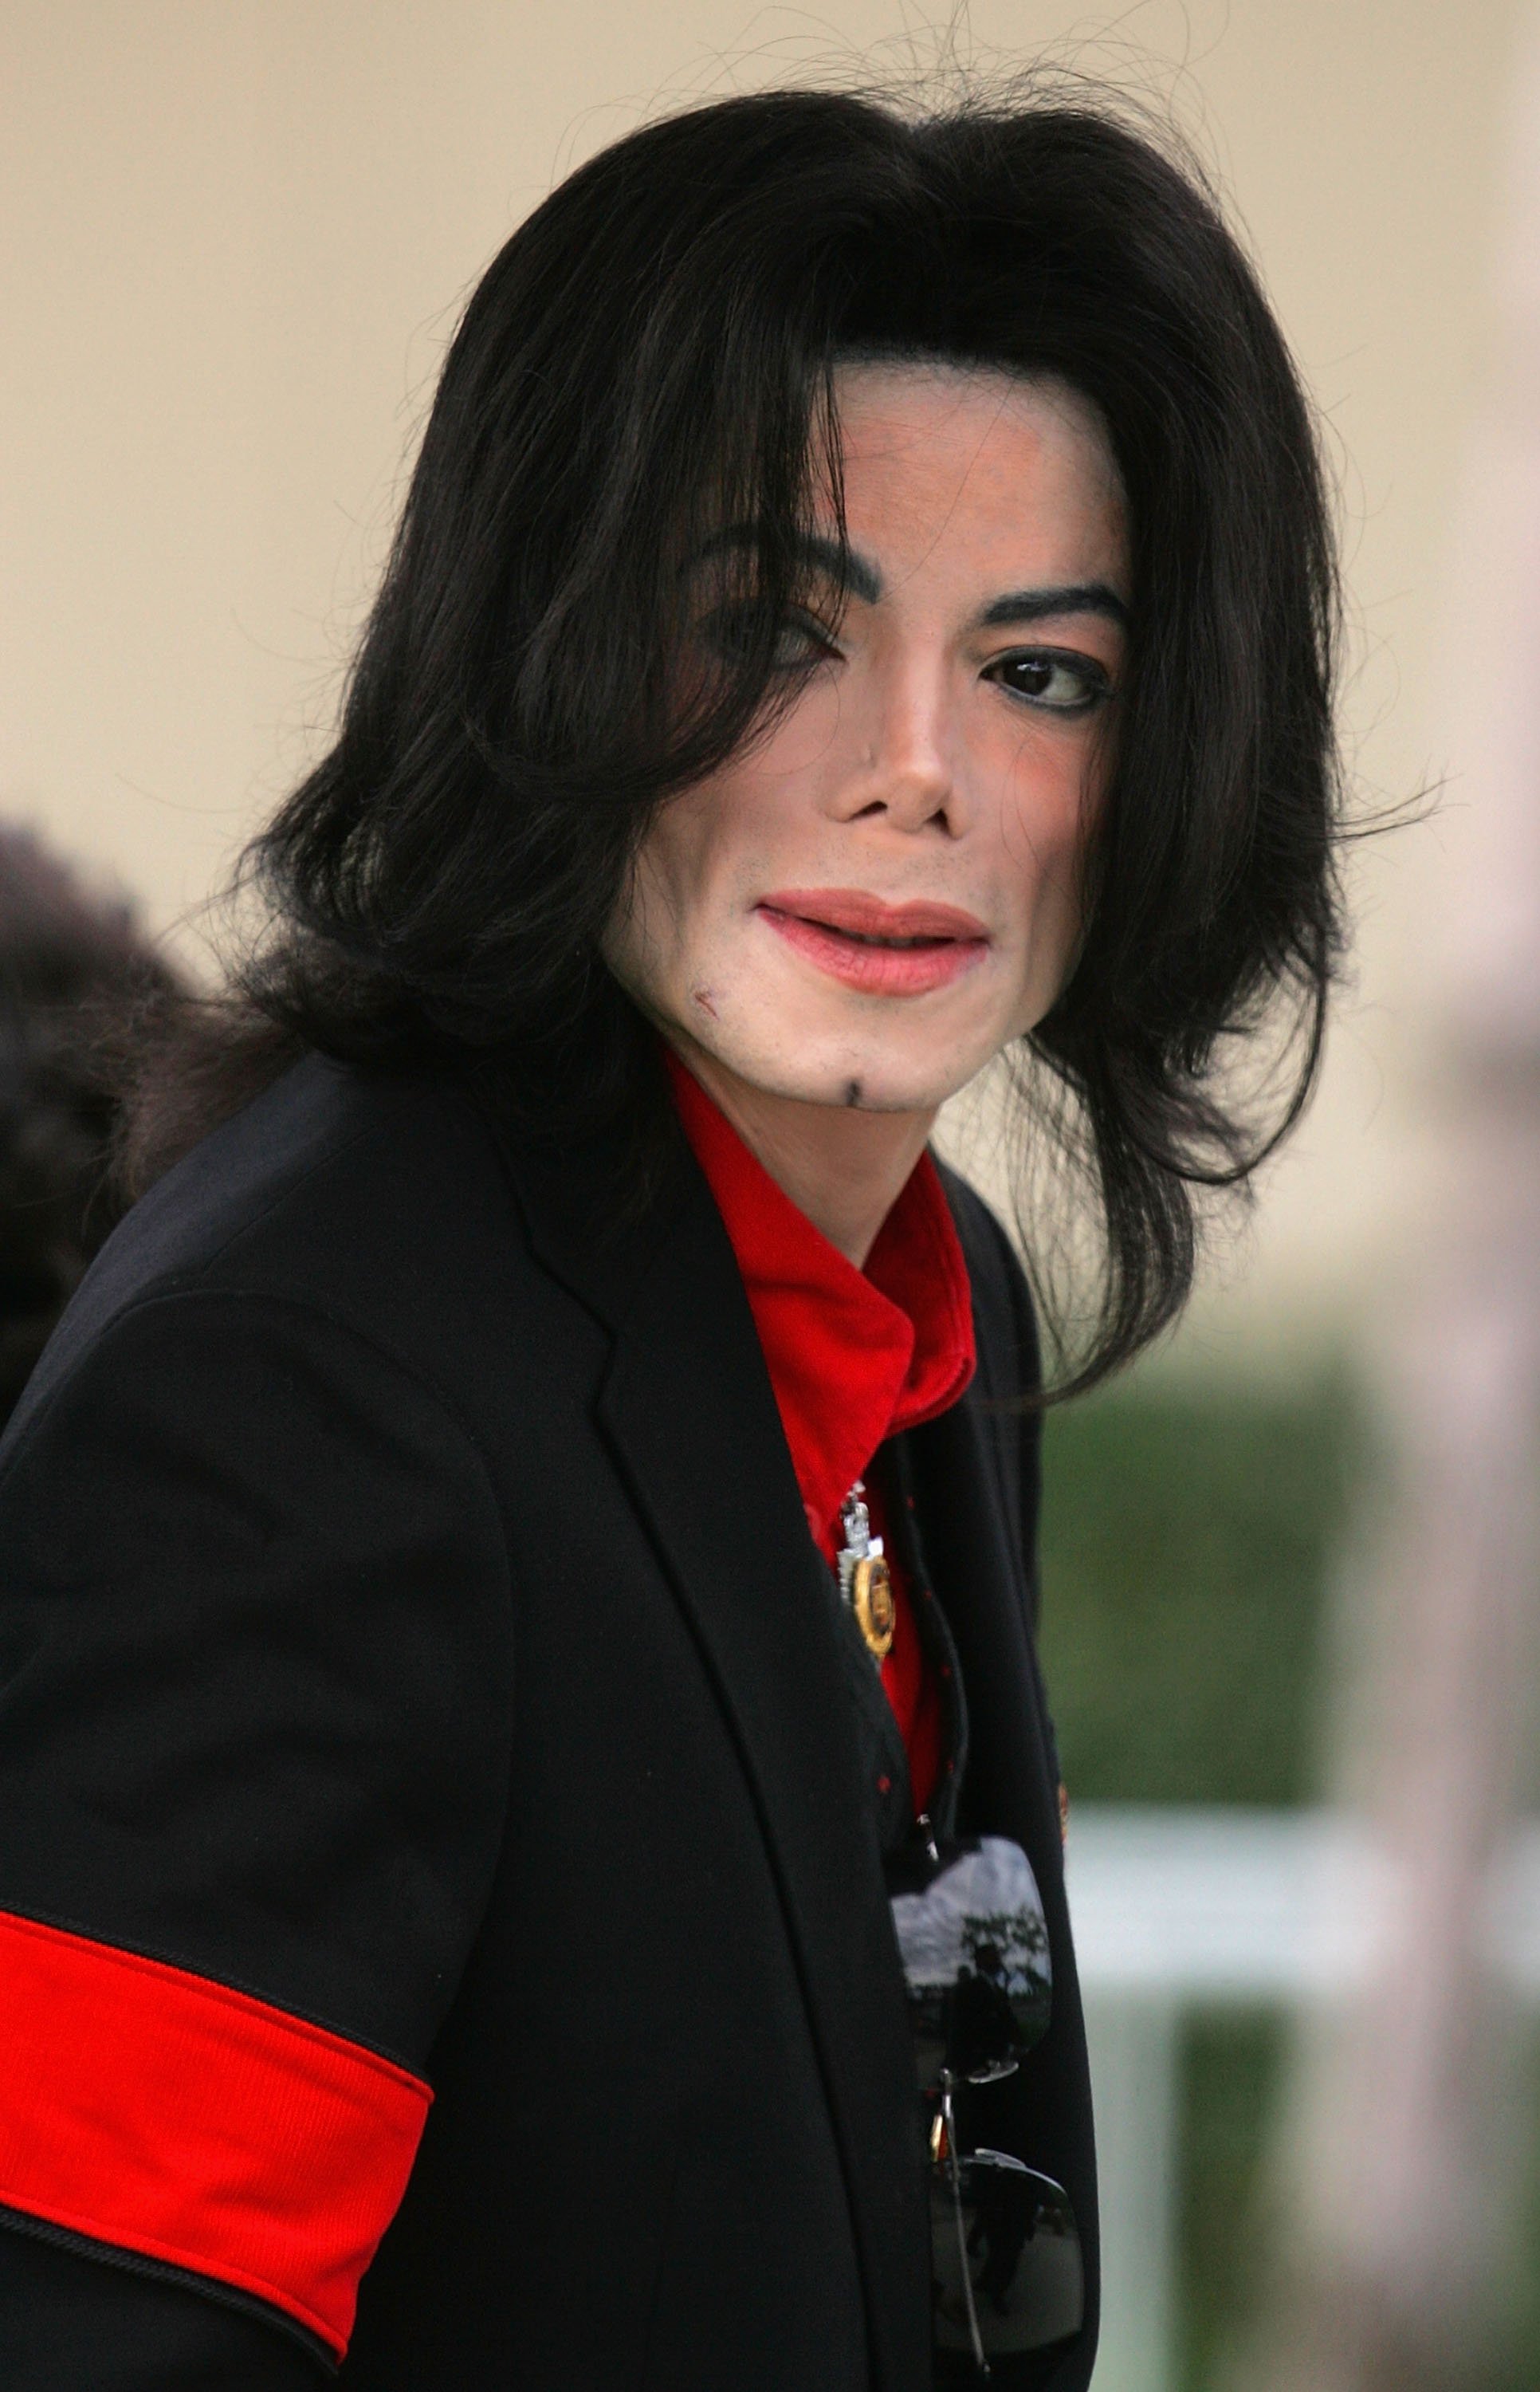 Michael Jackson arriving at the Santa Barbara County Courthouse on the 19th day of his child molestation trial on March 24, 2005. | Source: Getty Images 